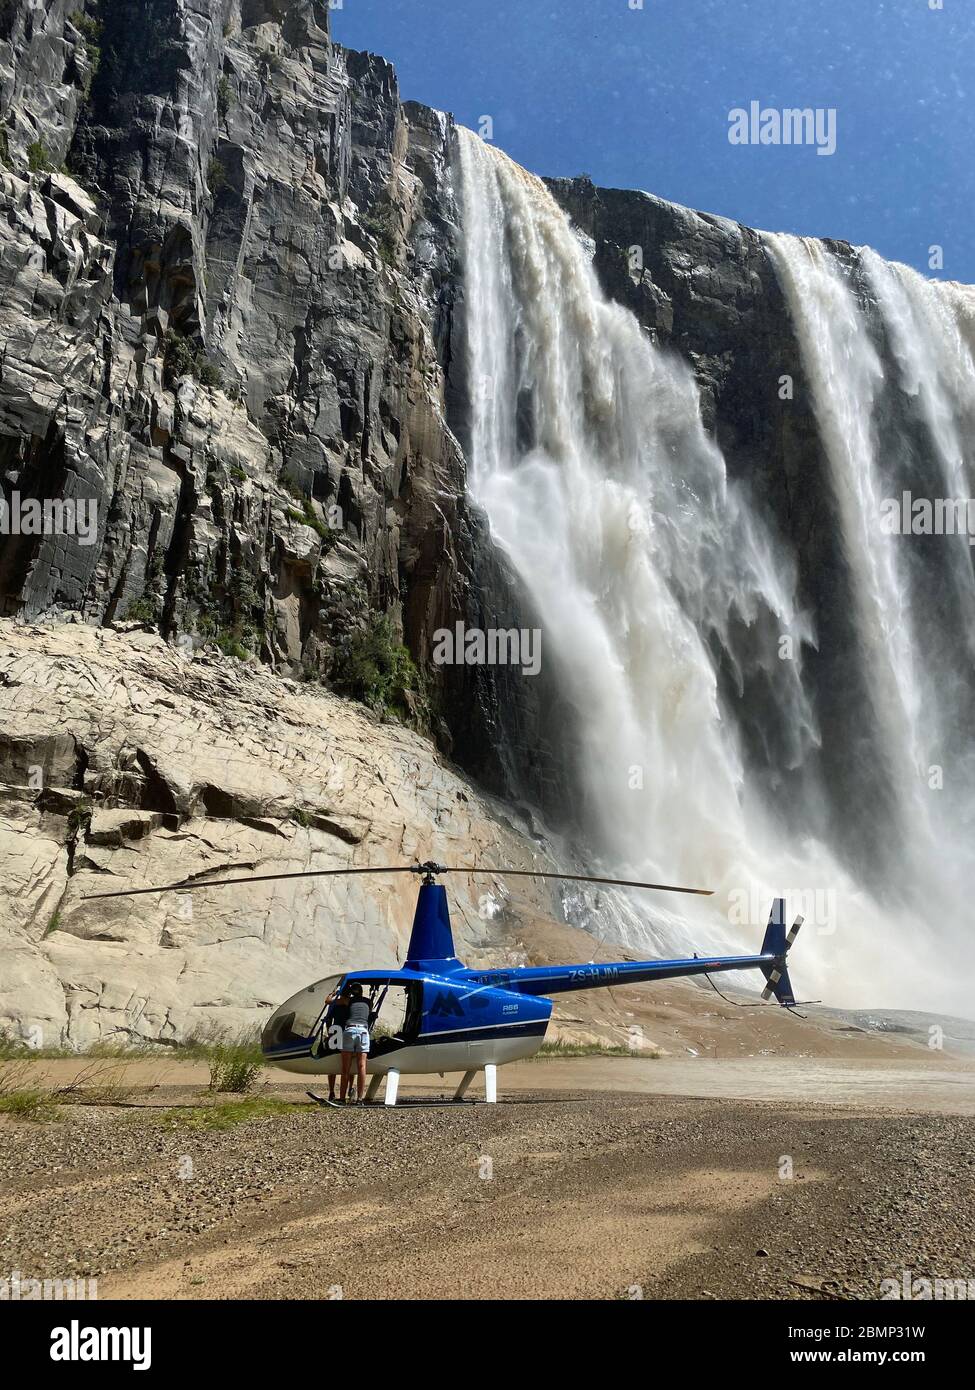 After the pilot has landed his helicopter safely below a large waterfall, she stows everything away so that it does not get wet. Stock Photo